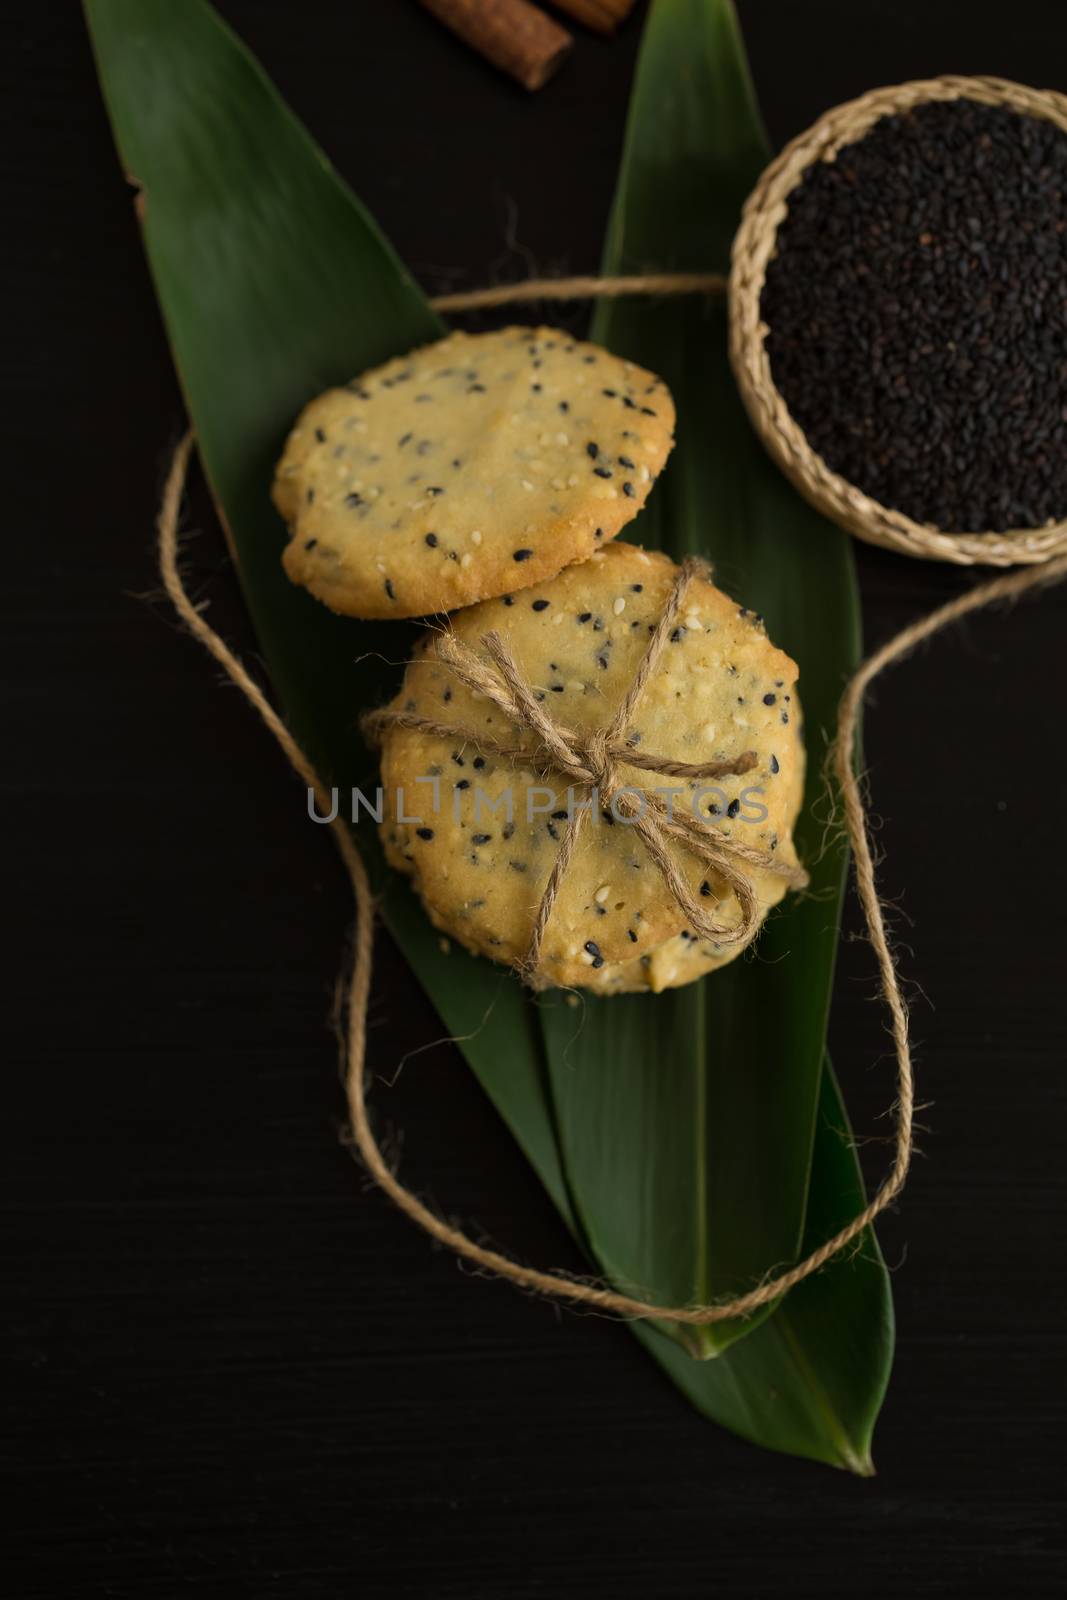 Sesame Cookies, sesame and milk on black wooden background by kaiskynet